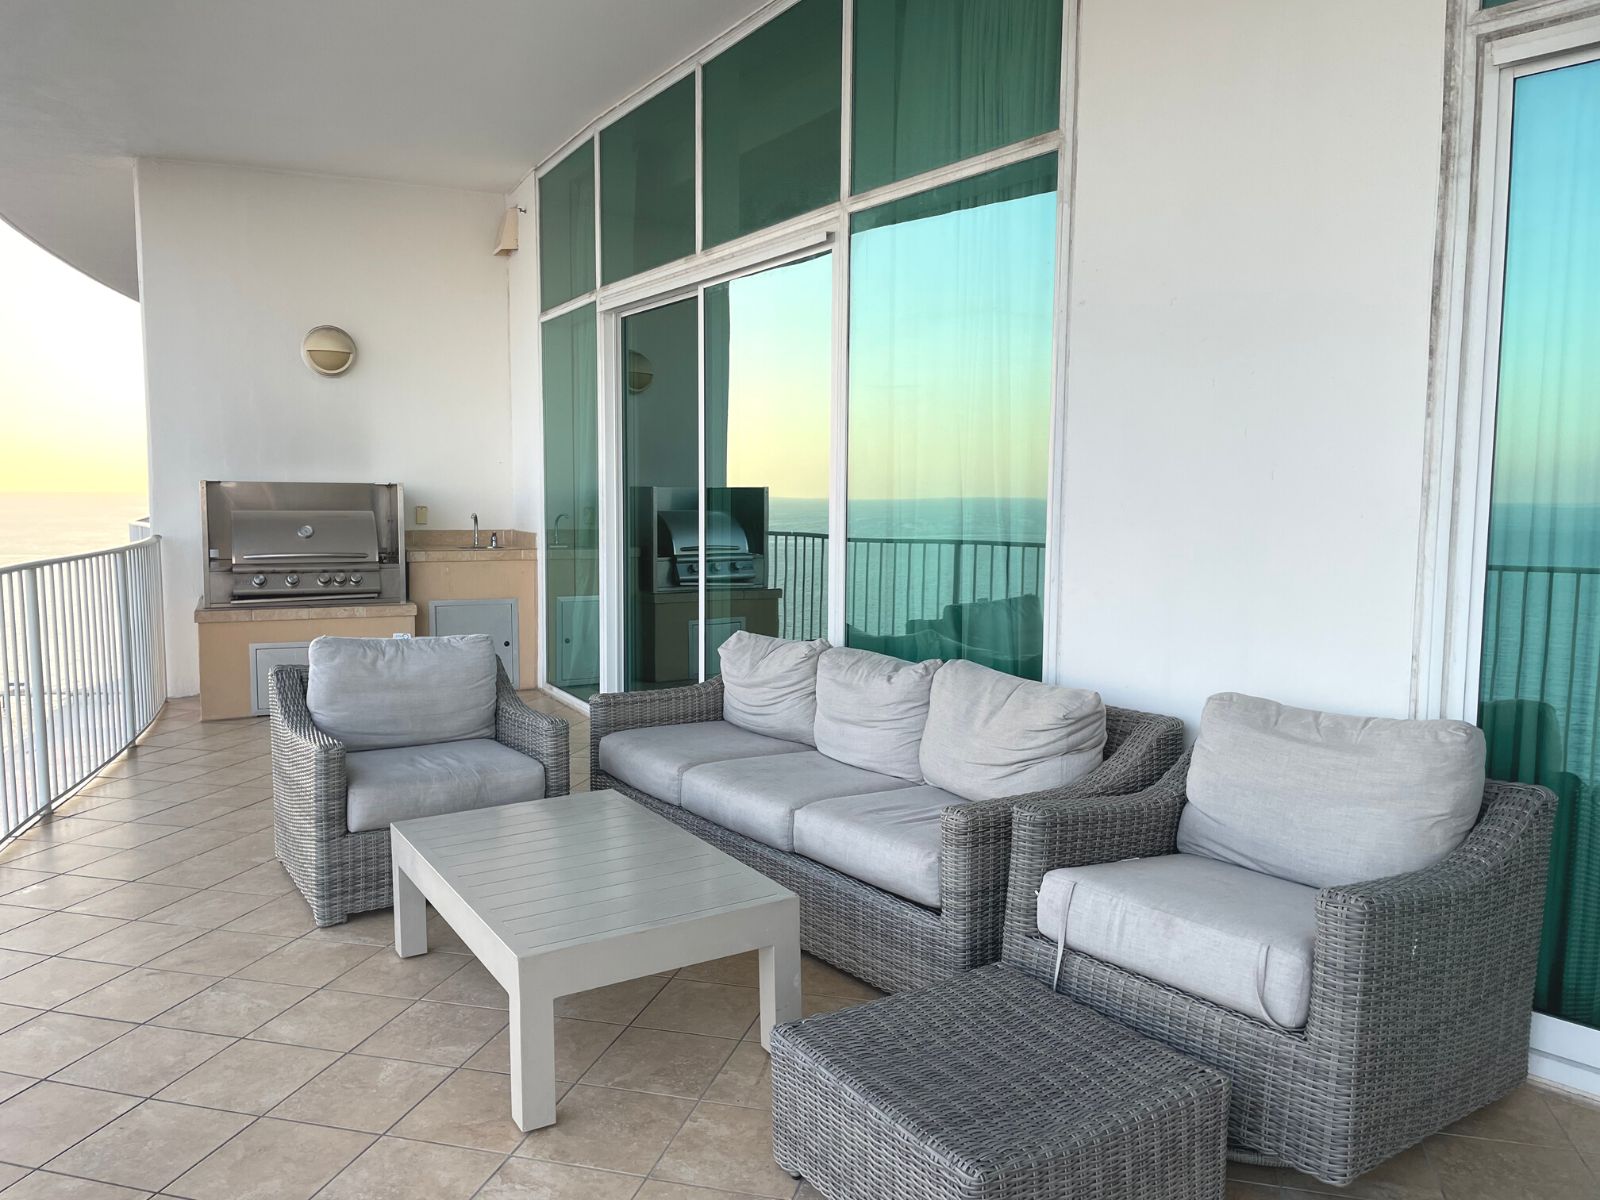 Patio furniture on the balcony of our Turquoise Place unit.